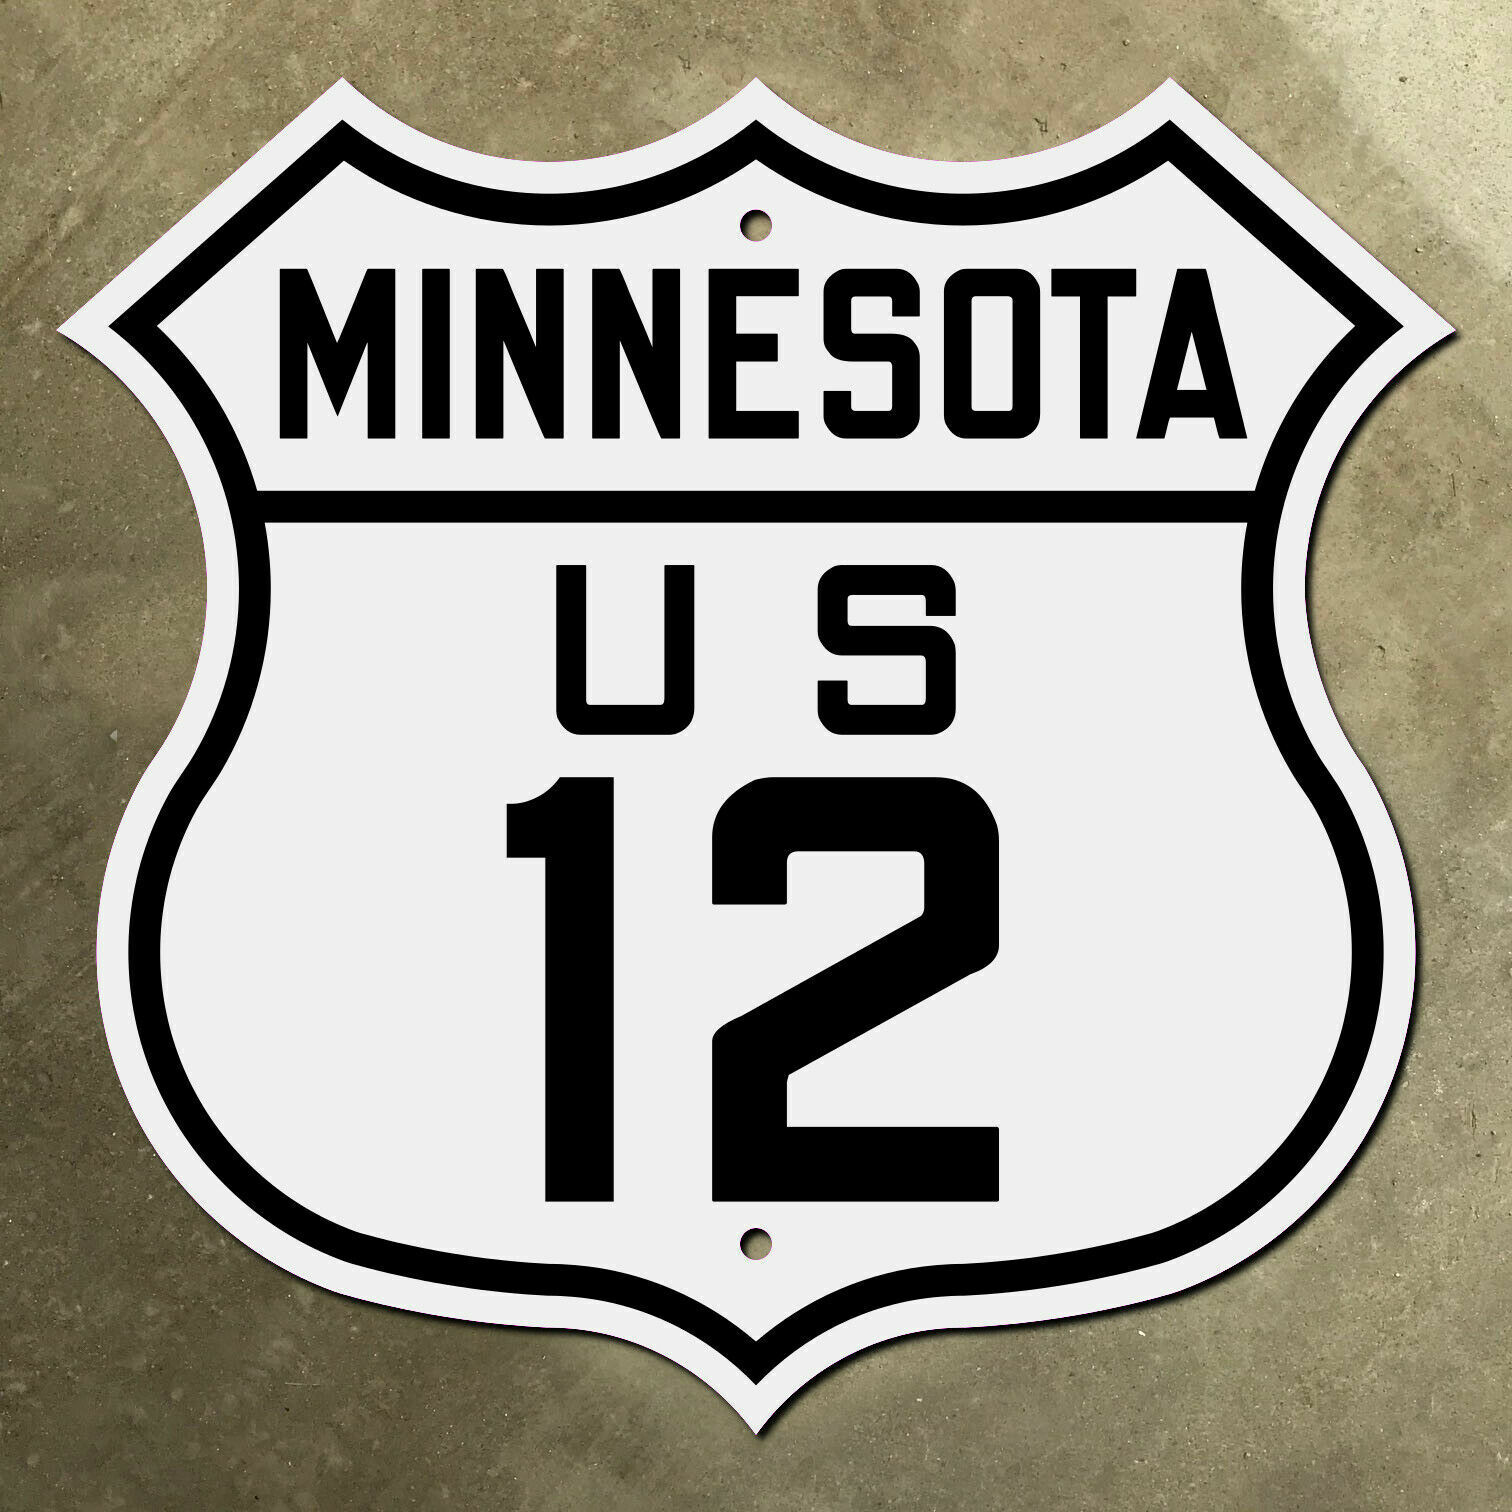 Minnesota Minneapolis St. Paul US route 12 highway marker road sign 1926 12x12